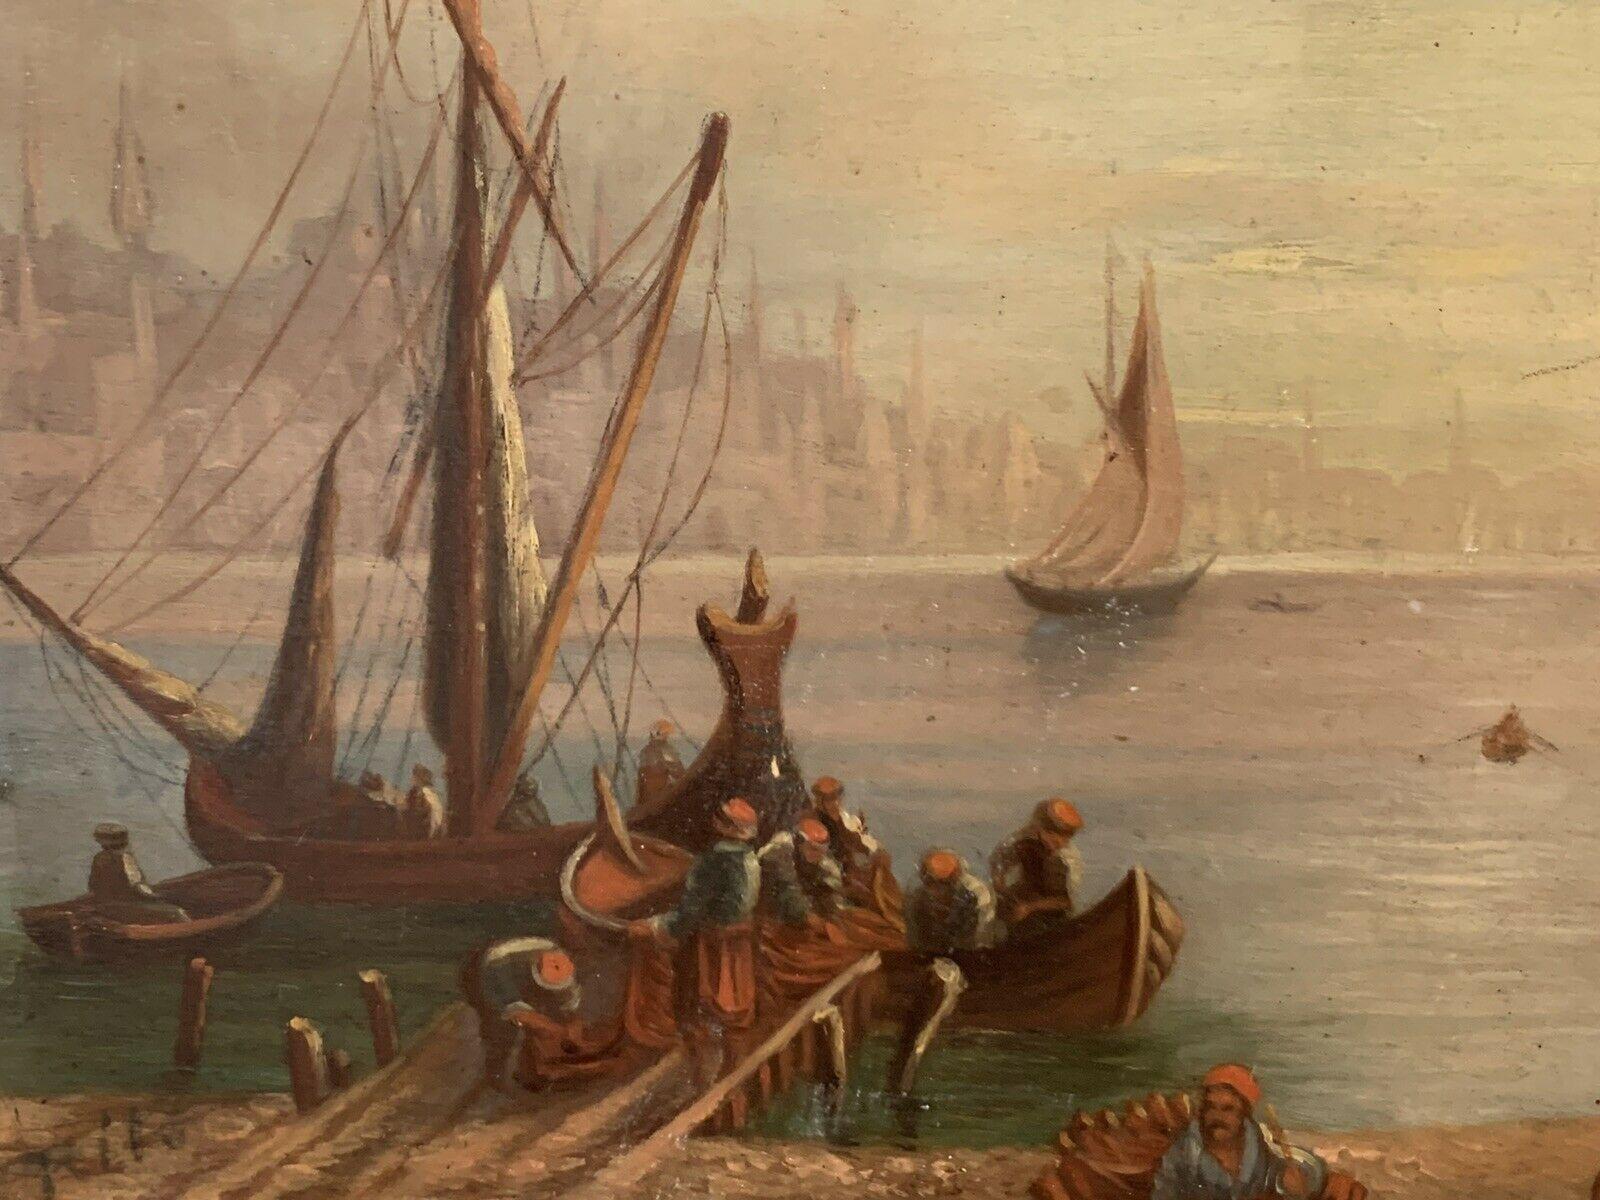 19th CENTURY EUROPEAN OIL ON WOOD PANEL - BUSY MERCHANT SHIPPING SUNSET SCENE For Sale 3